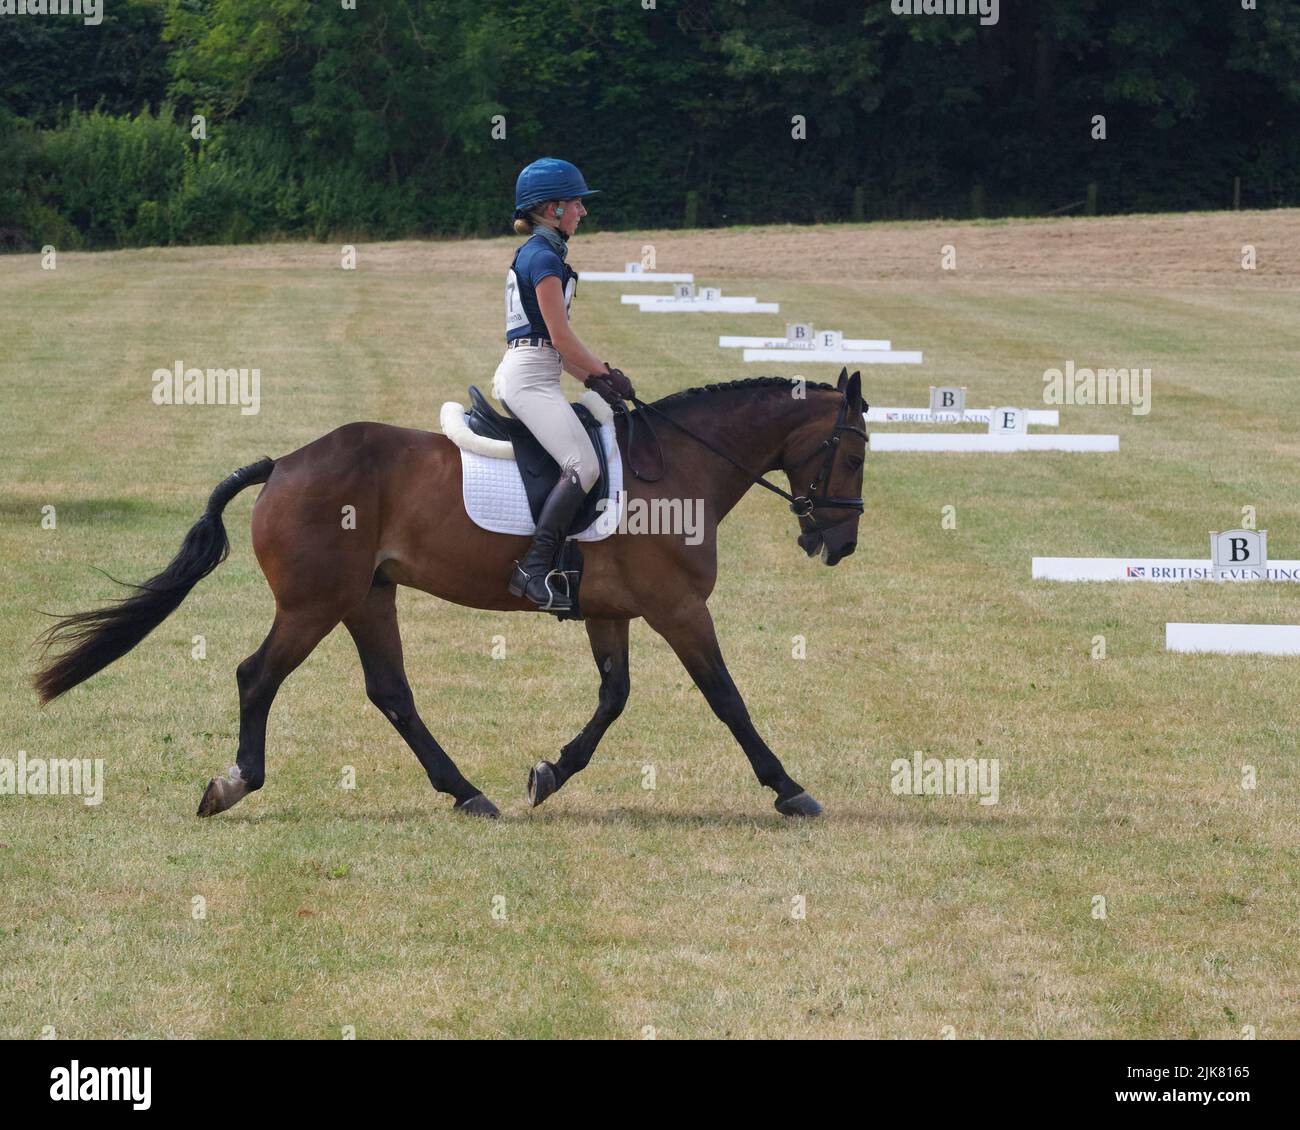 East Budleigh Salterton, United Kingdom, 31 Jul, 2022, Isabelle Geran rides Menai Cosmic Duke in the Dressage section of Bicton Horse Trials at Bicton Horse Trials. Credit: Will Tudor/Alamy Live News Stock Photo